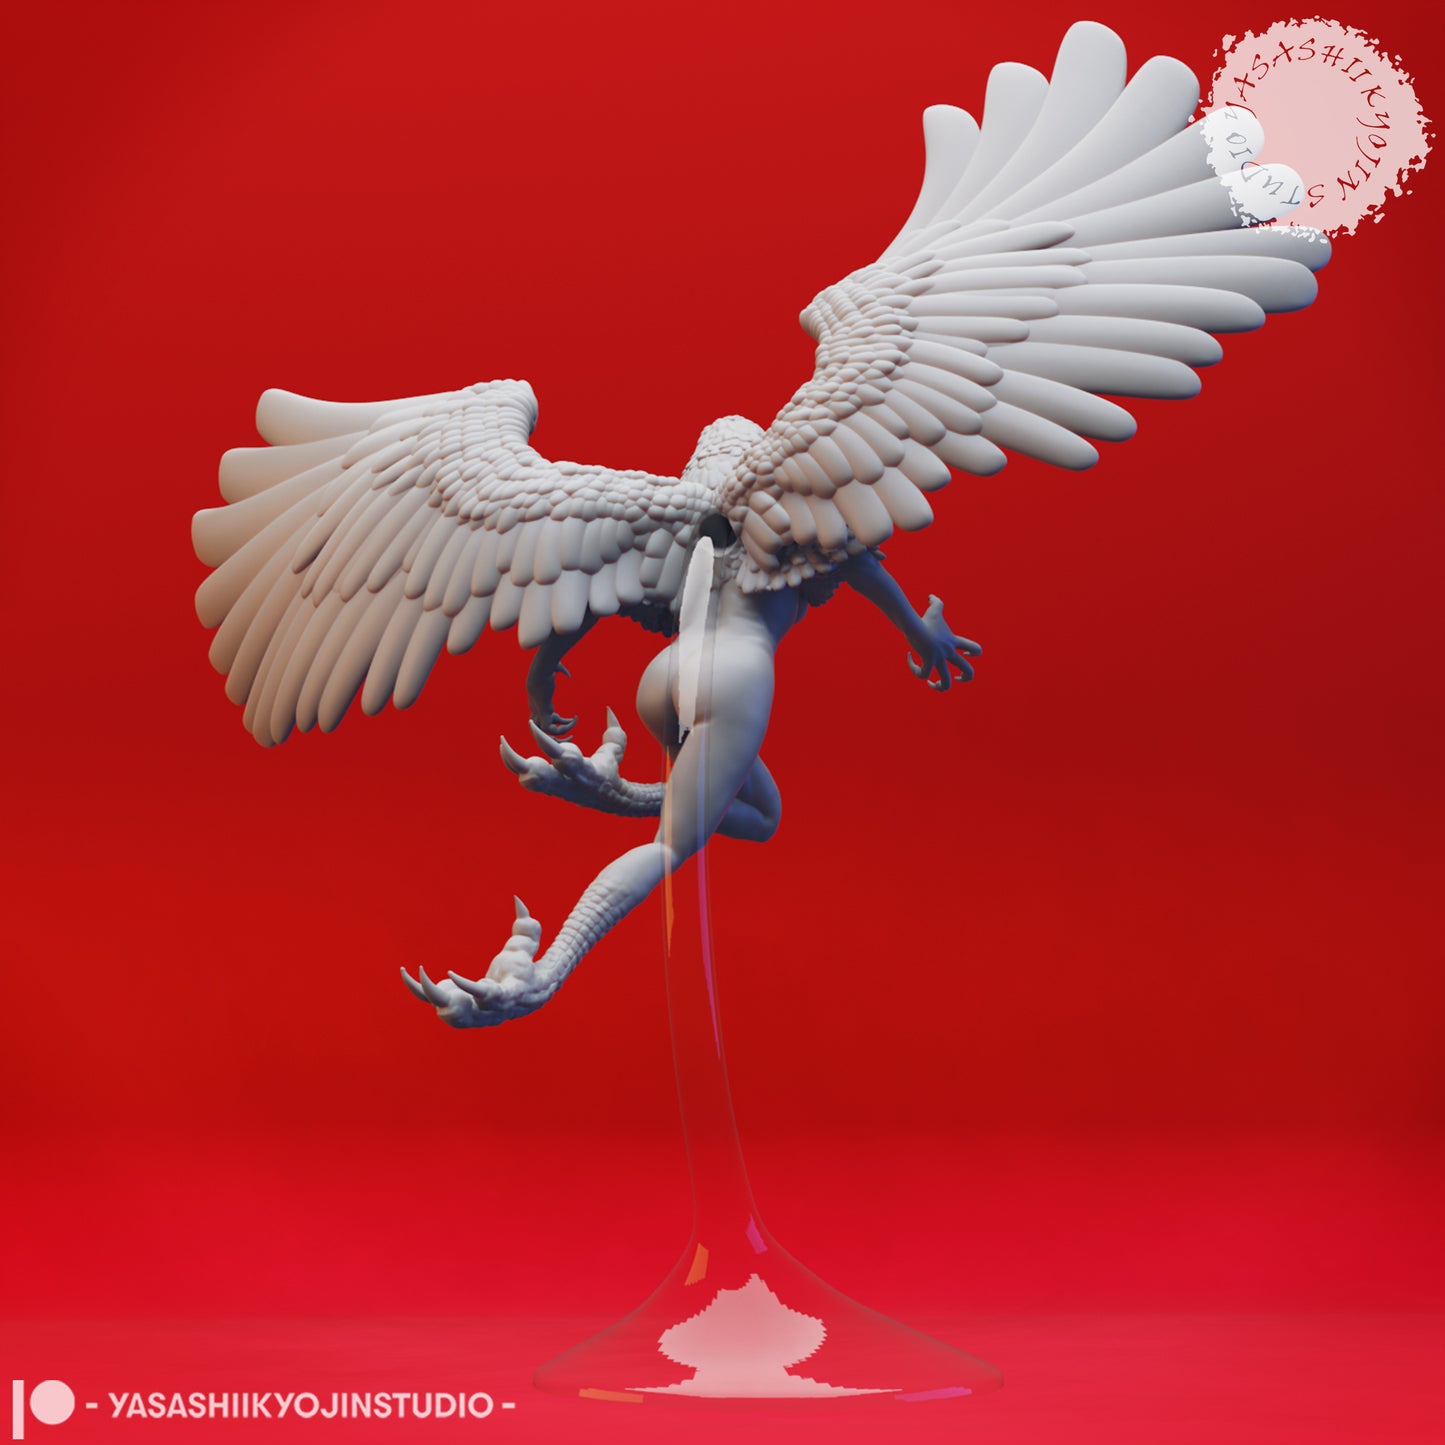 Harpy Mob - Tabletop Miniature (Pre-Supported STL)